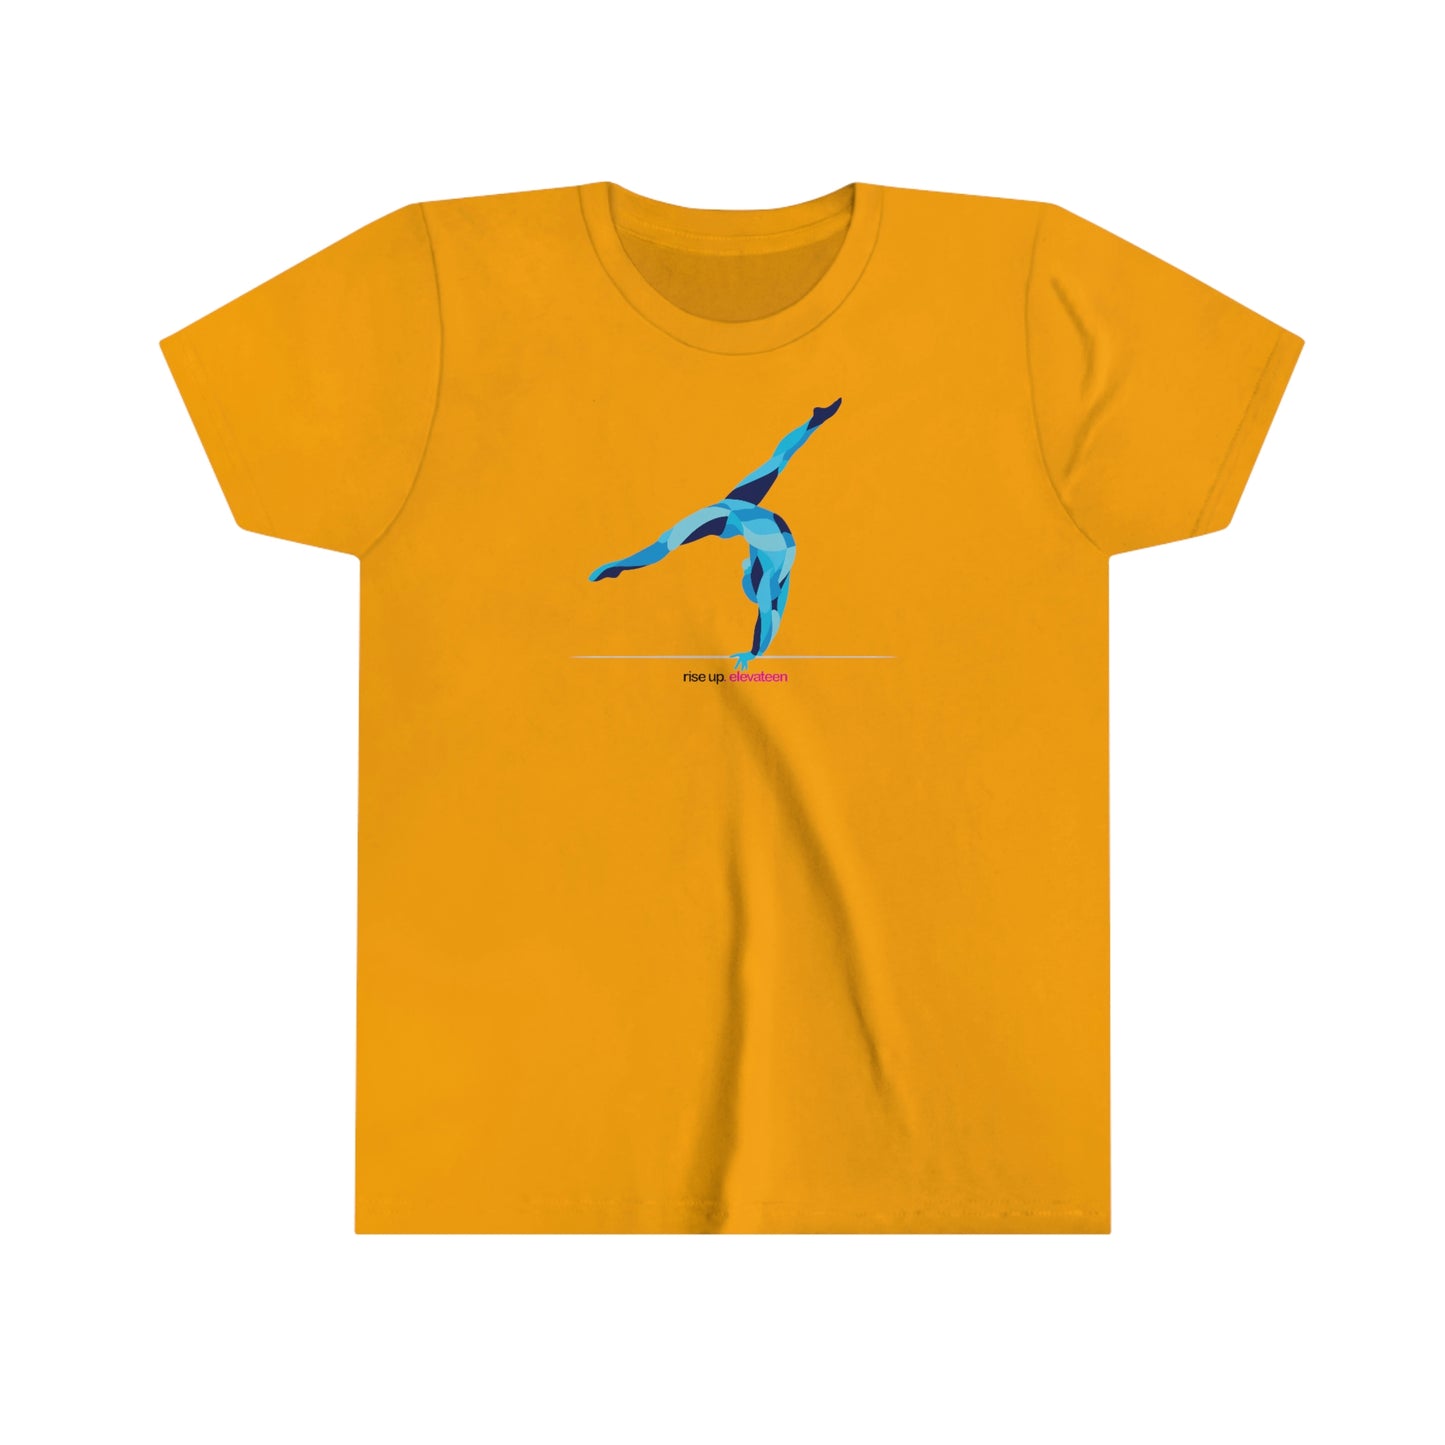 Kids | Gymnastics Girls / Youth tee / t-shirt | *RISE UP* Collection | 001